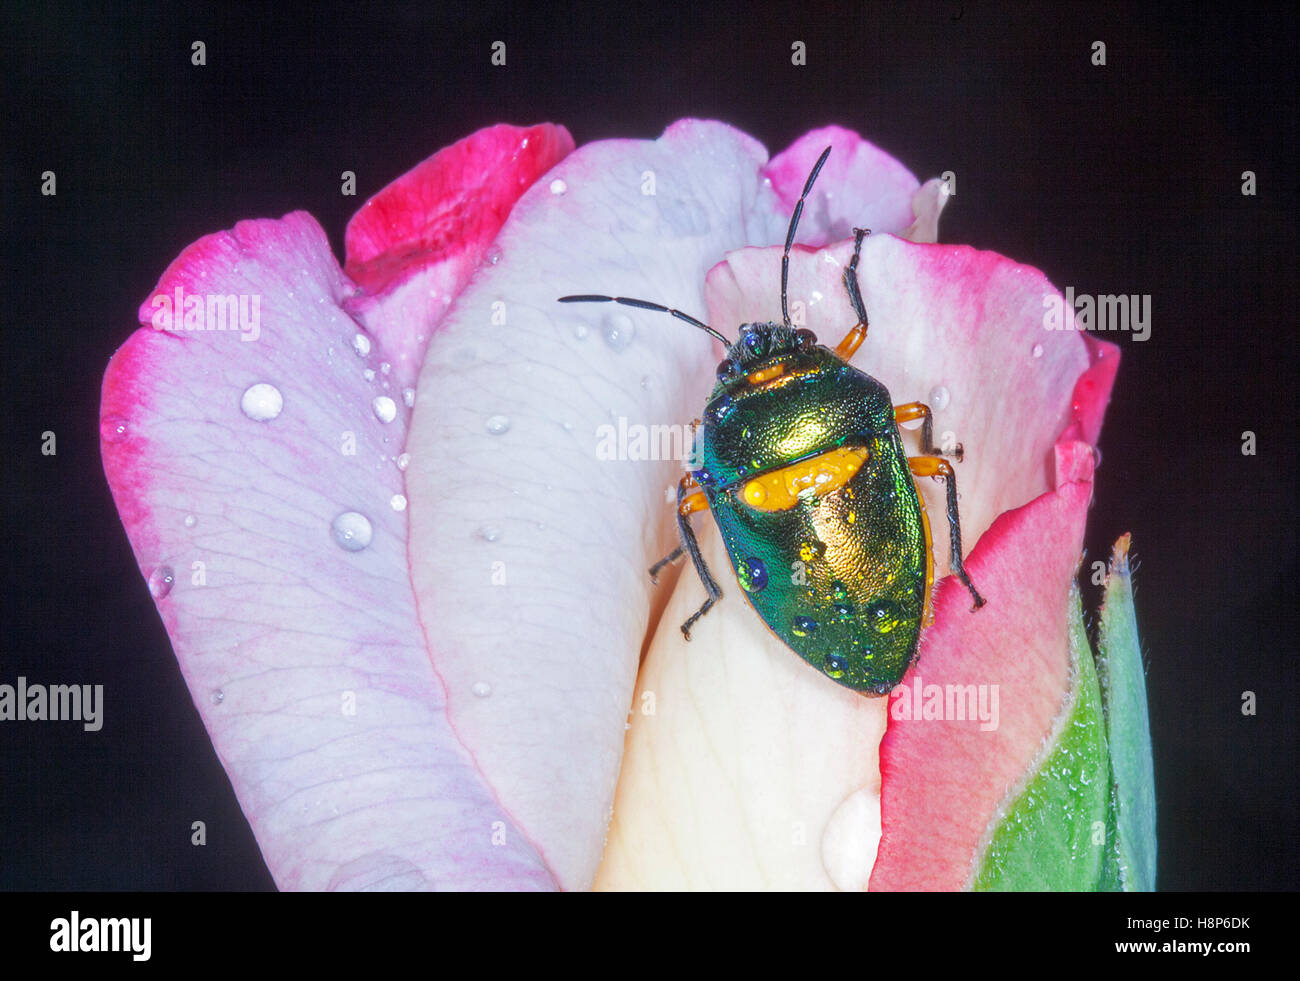 Metallic green jewel sap sucking beetle on  pink and white rose bud with raindrops on shell and petals of flower against black background Stock Photo